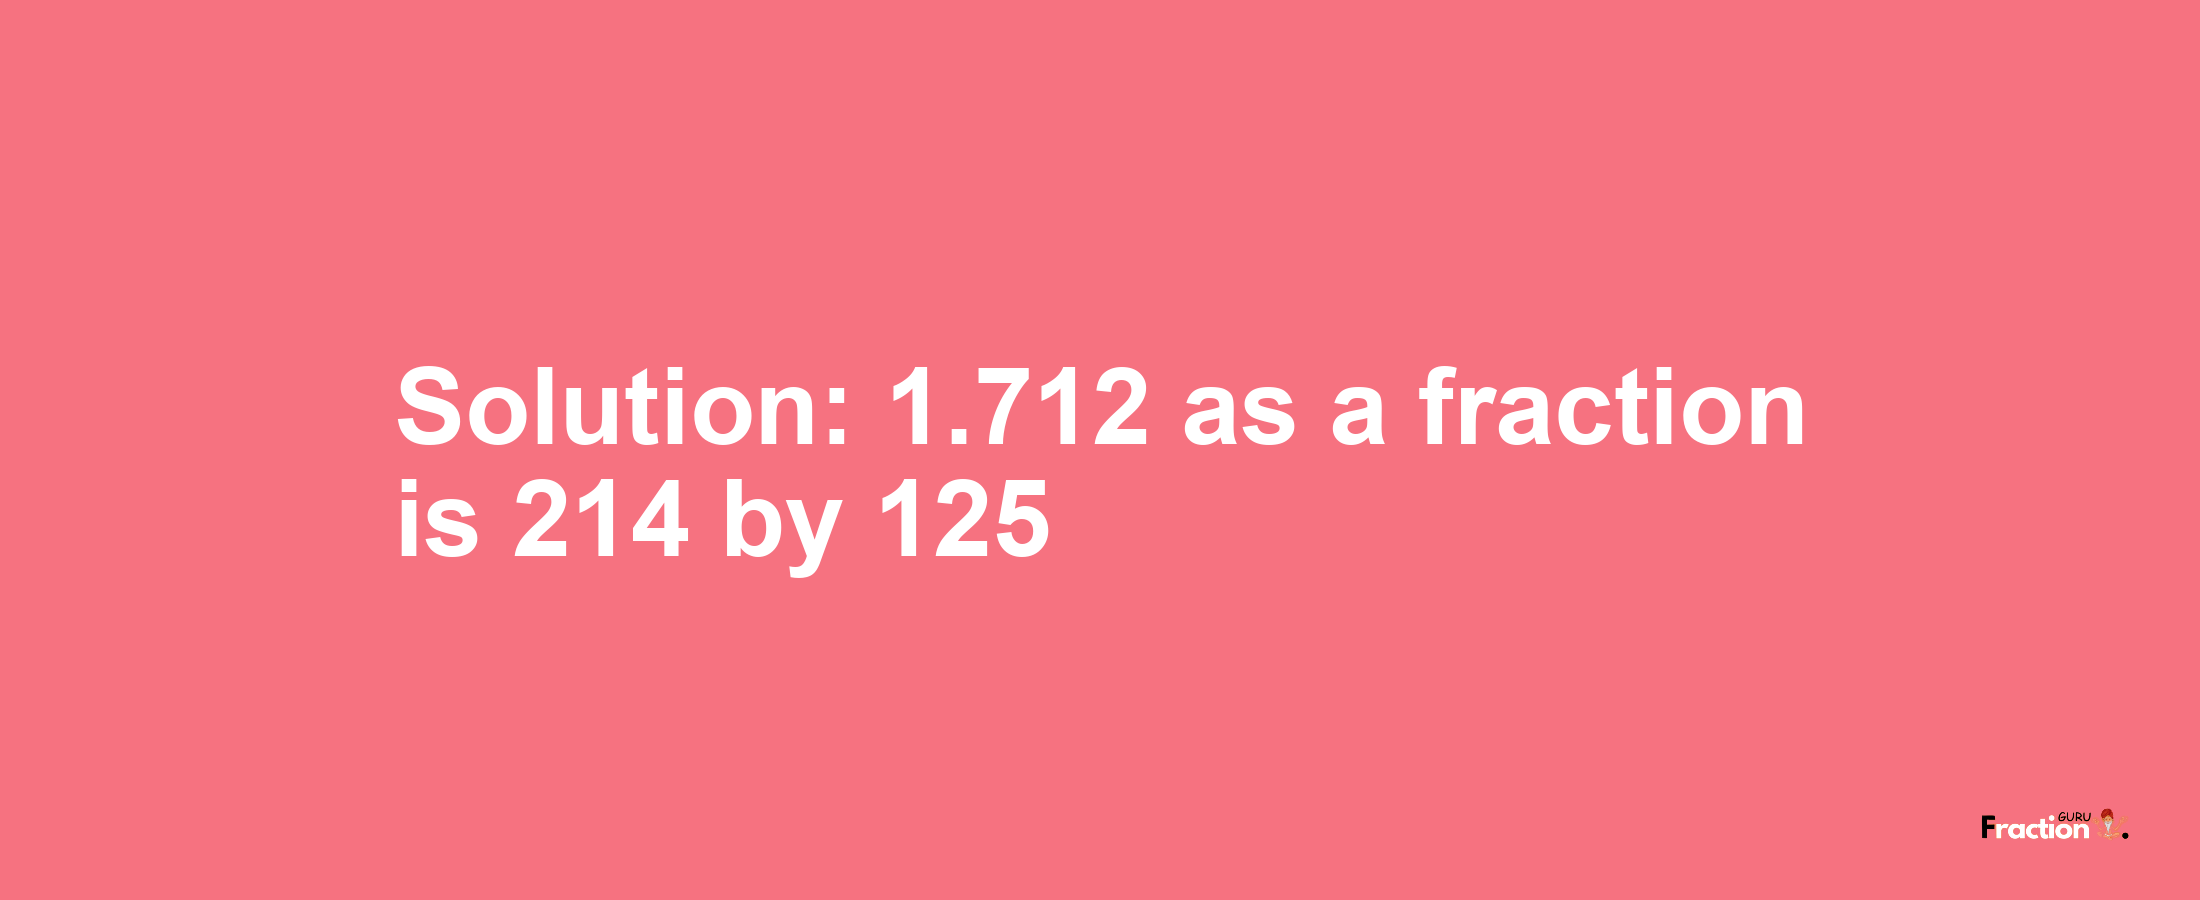 Solution:1.712 as a fraction is 214/125